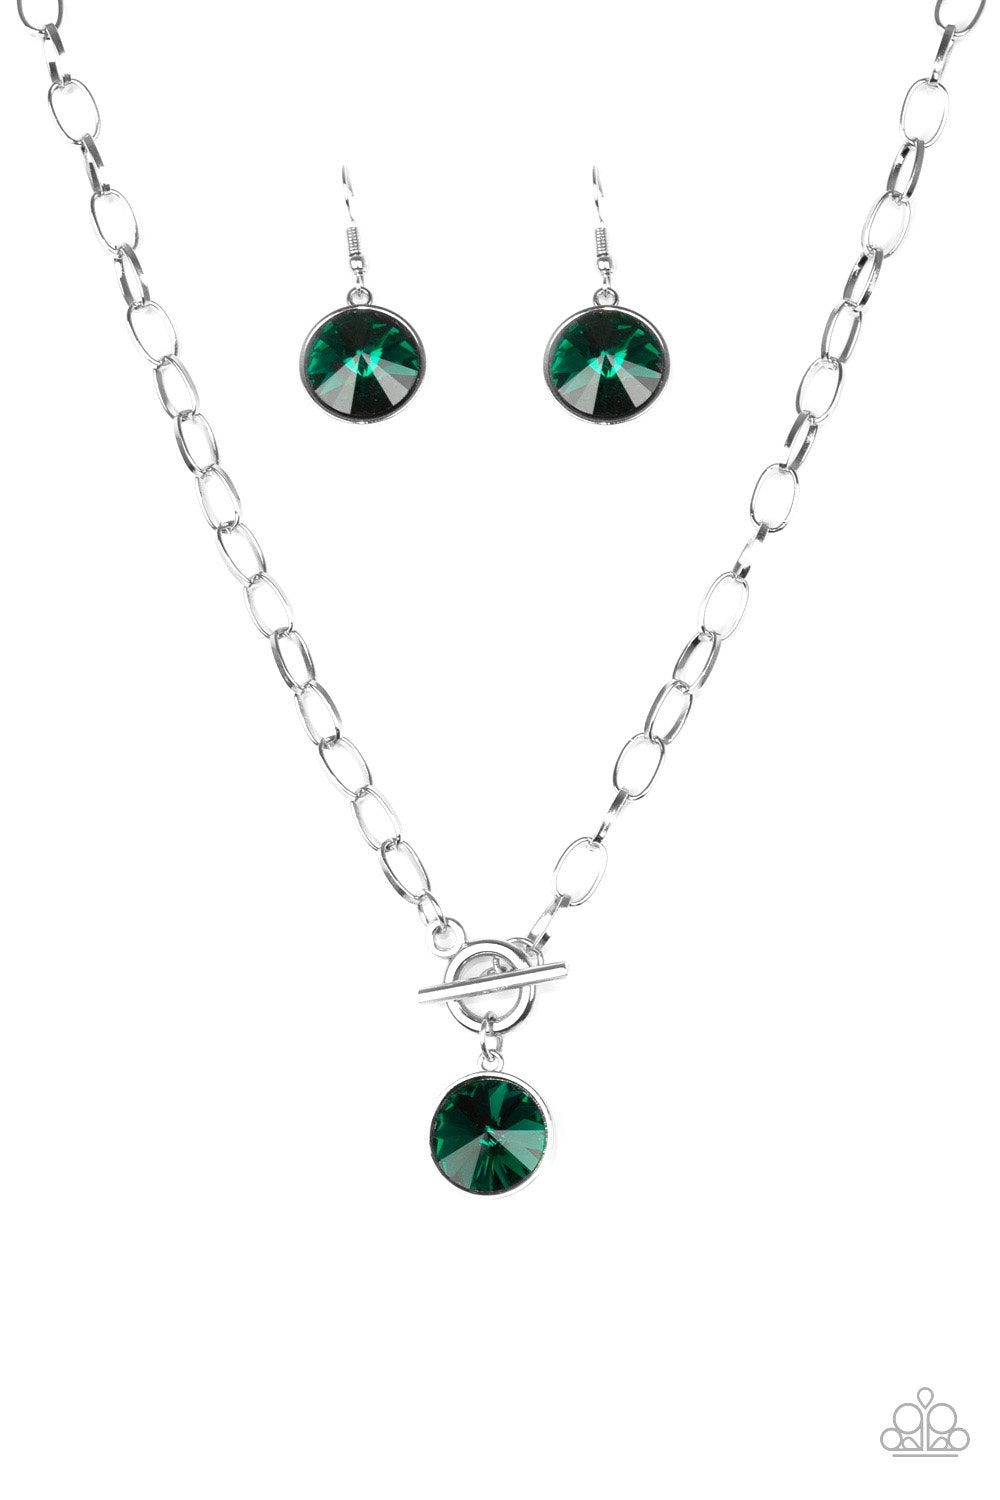 She Sparkles On Silver and Green Rhinestone Necklace - Paparazzi Accessories-CarasShop.com - $5 Jewelry by Cara Jewels